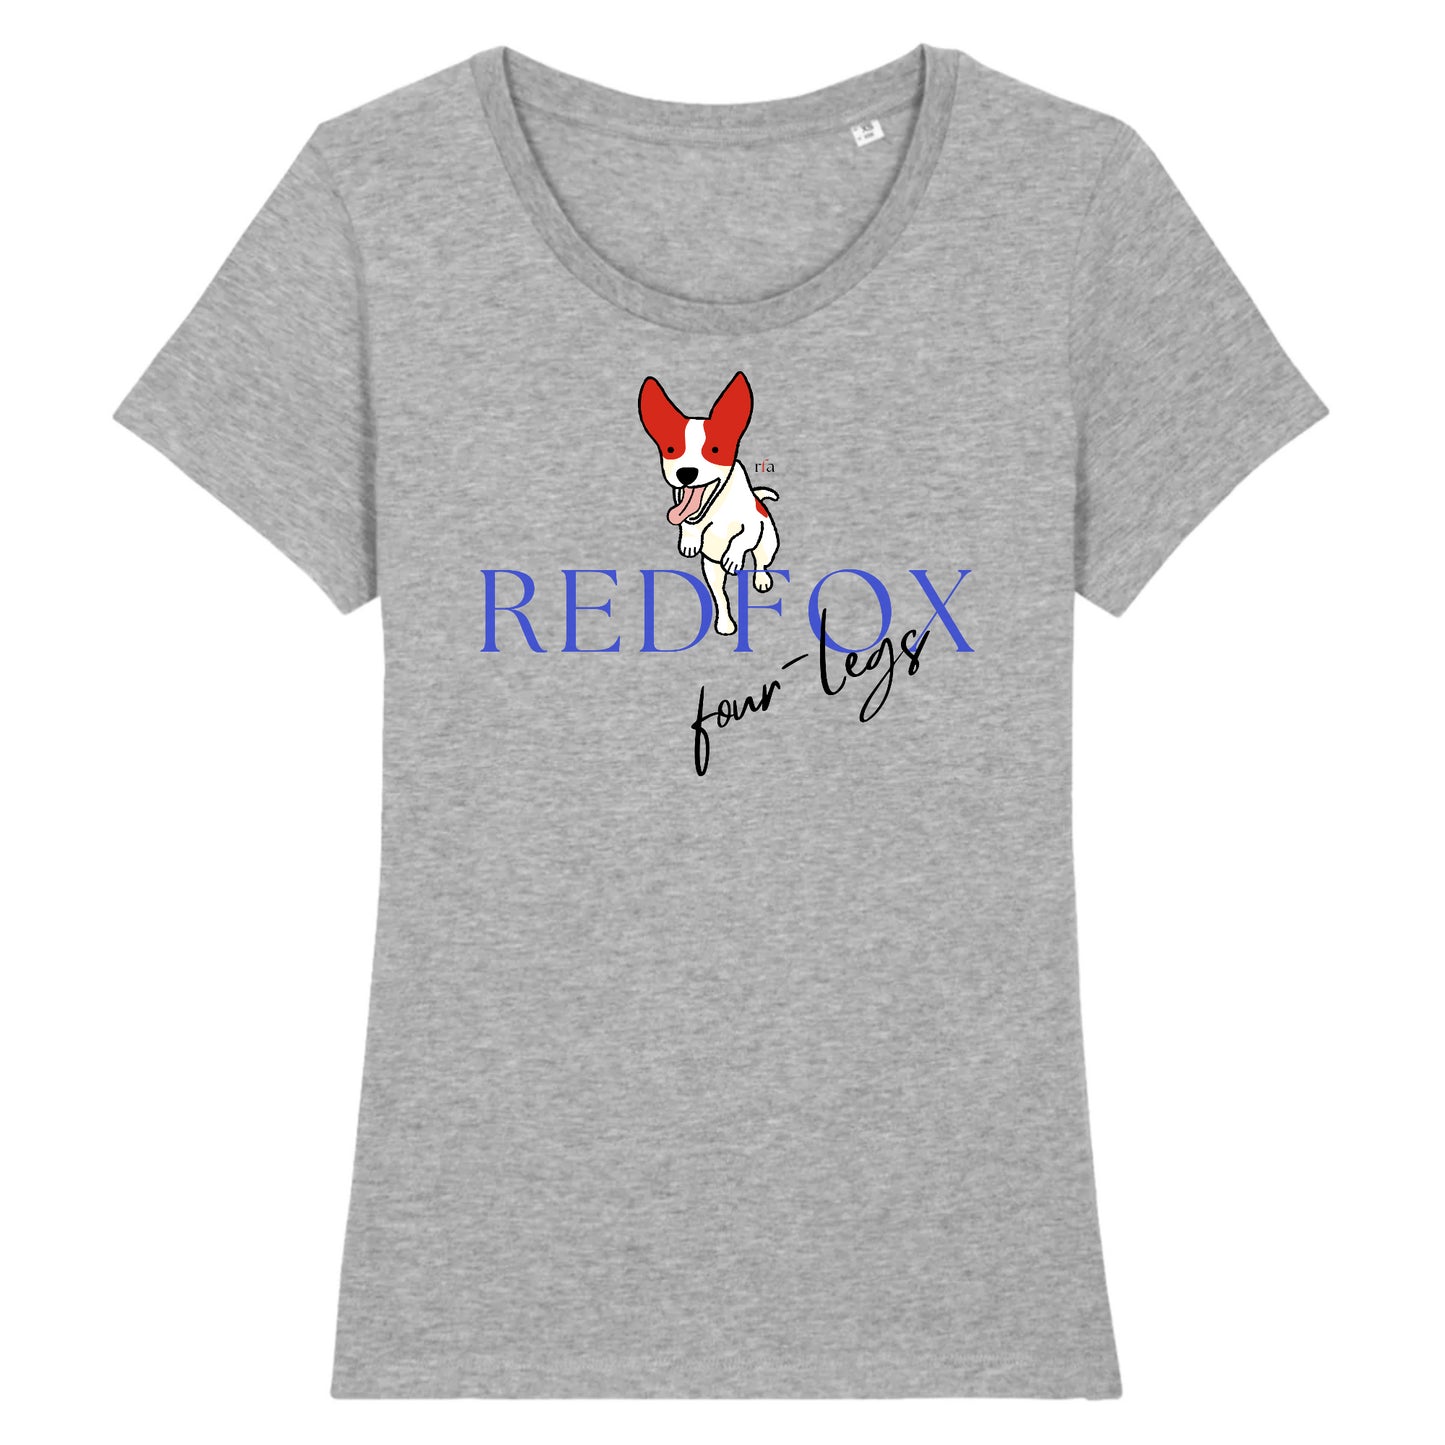 Classic Fitted Tee - REDFOX Four Legs Blue STELLA - 100% Organic Cotton